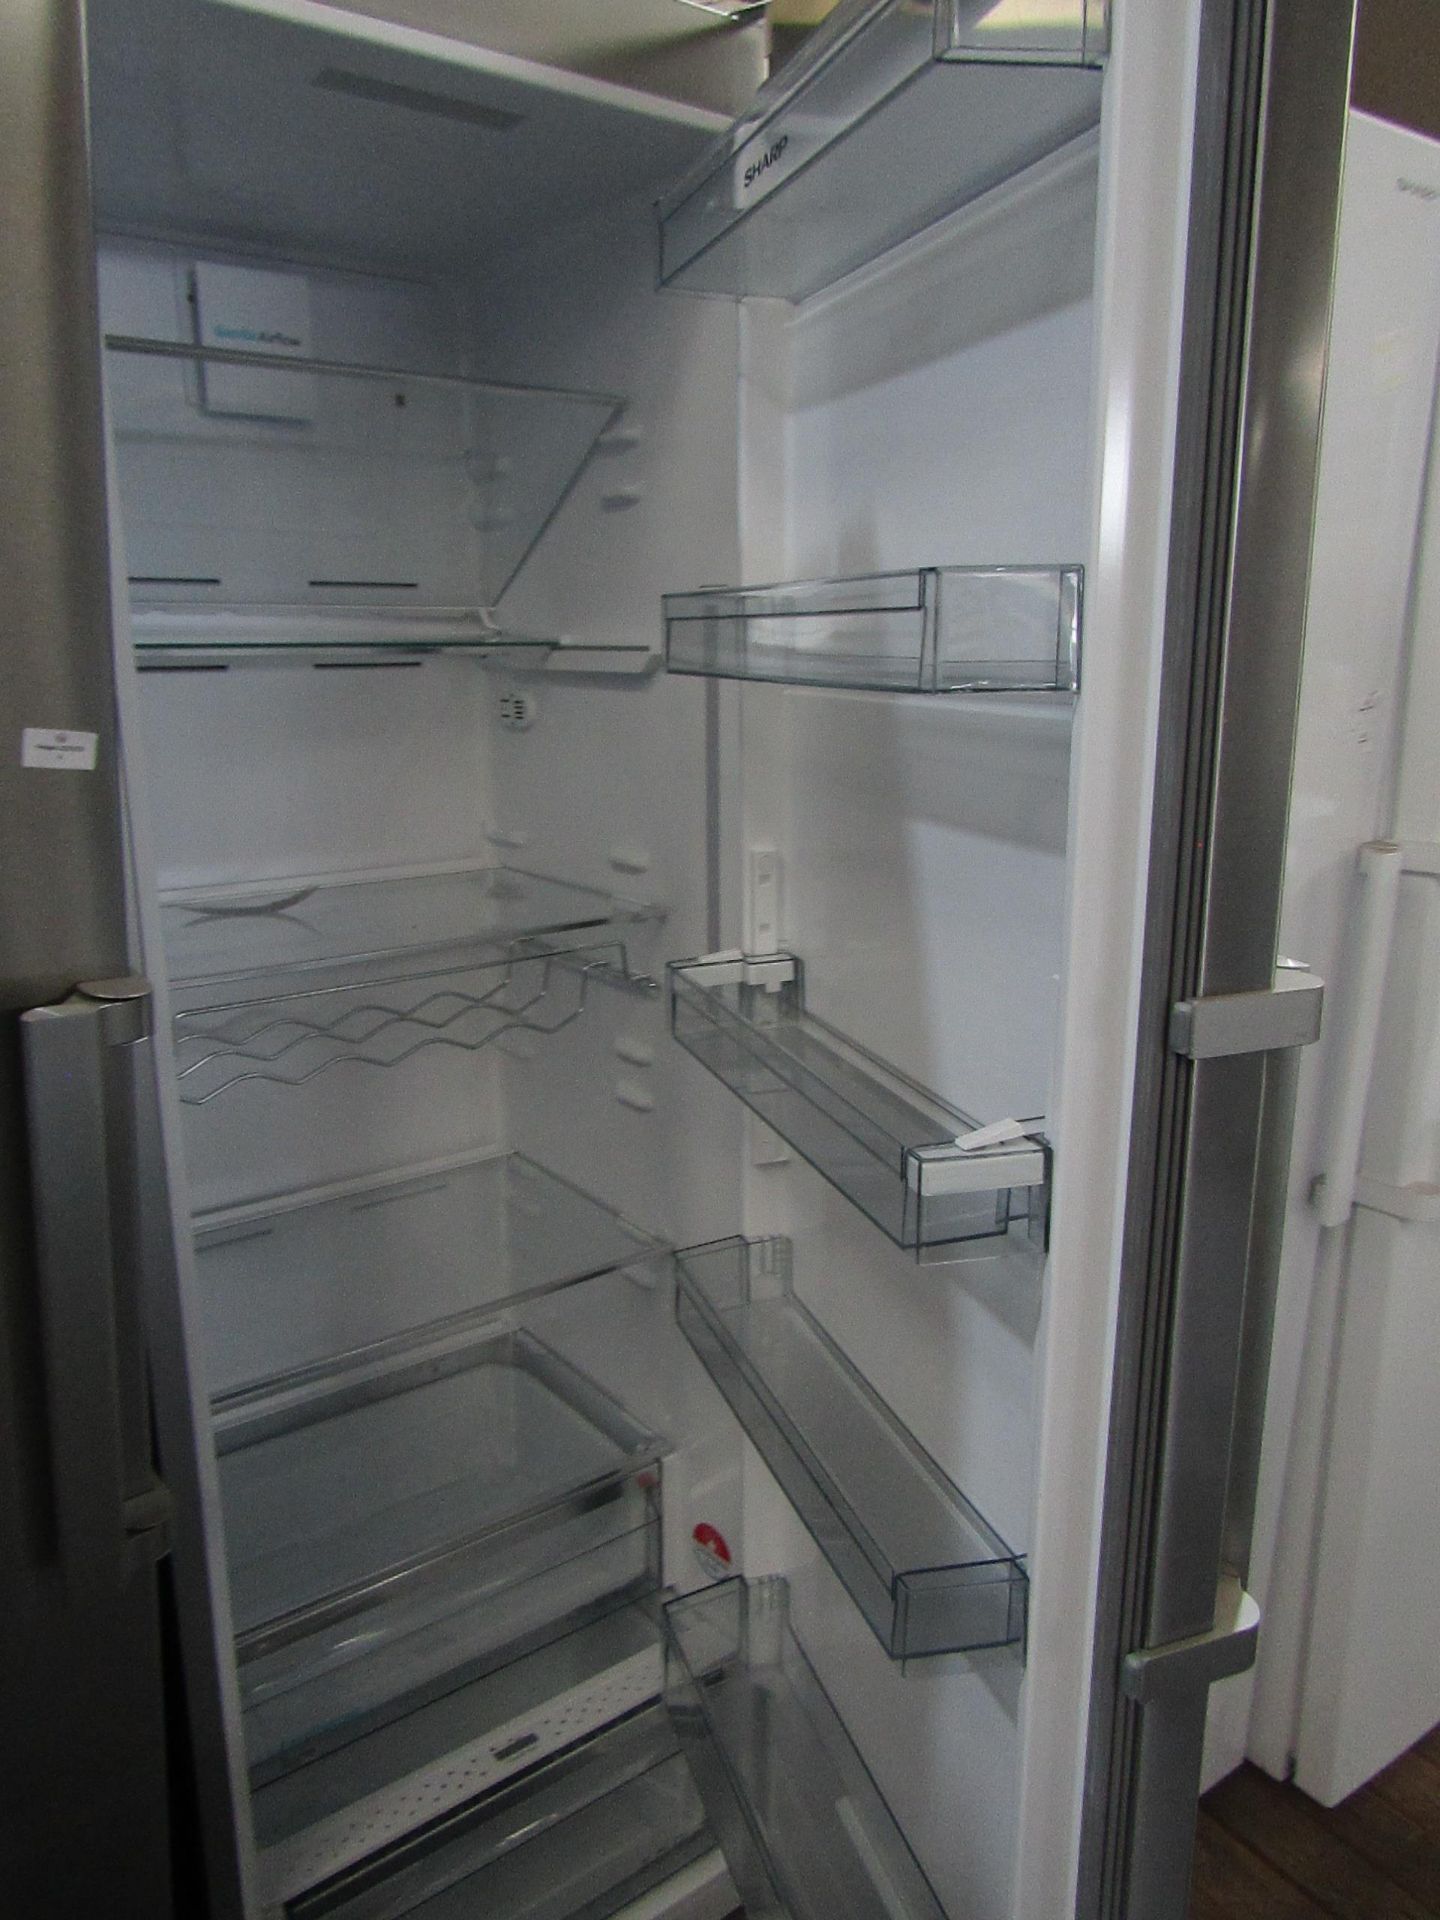 Sharp - Tall Stainless Steel Freestanding Fridge - tested and working for coldness, in good - Image 2 of 2